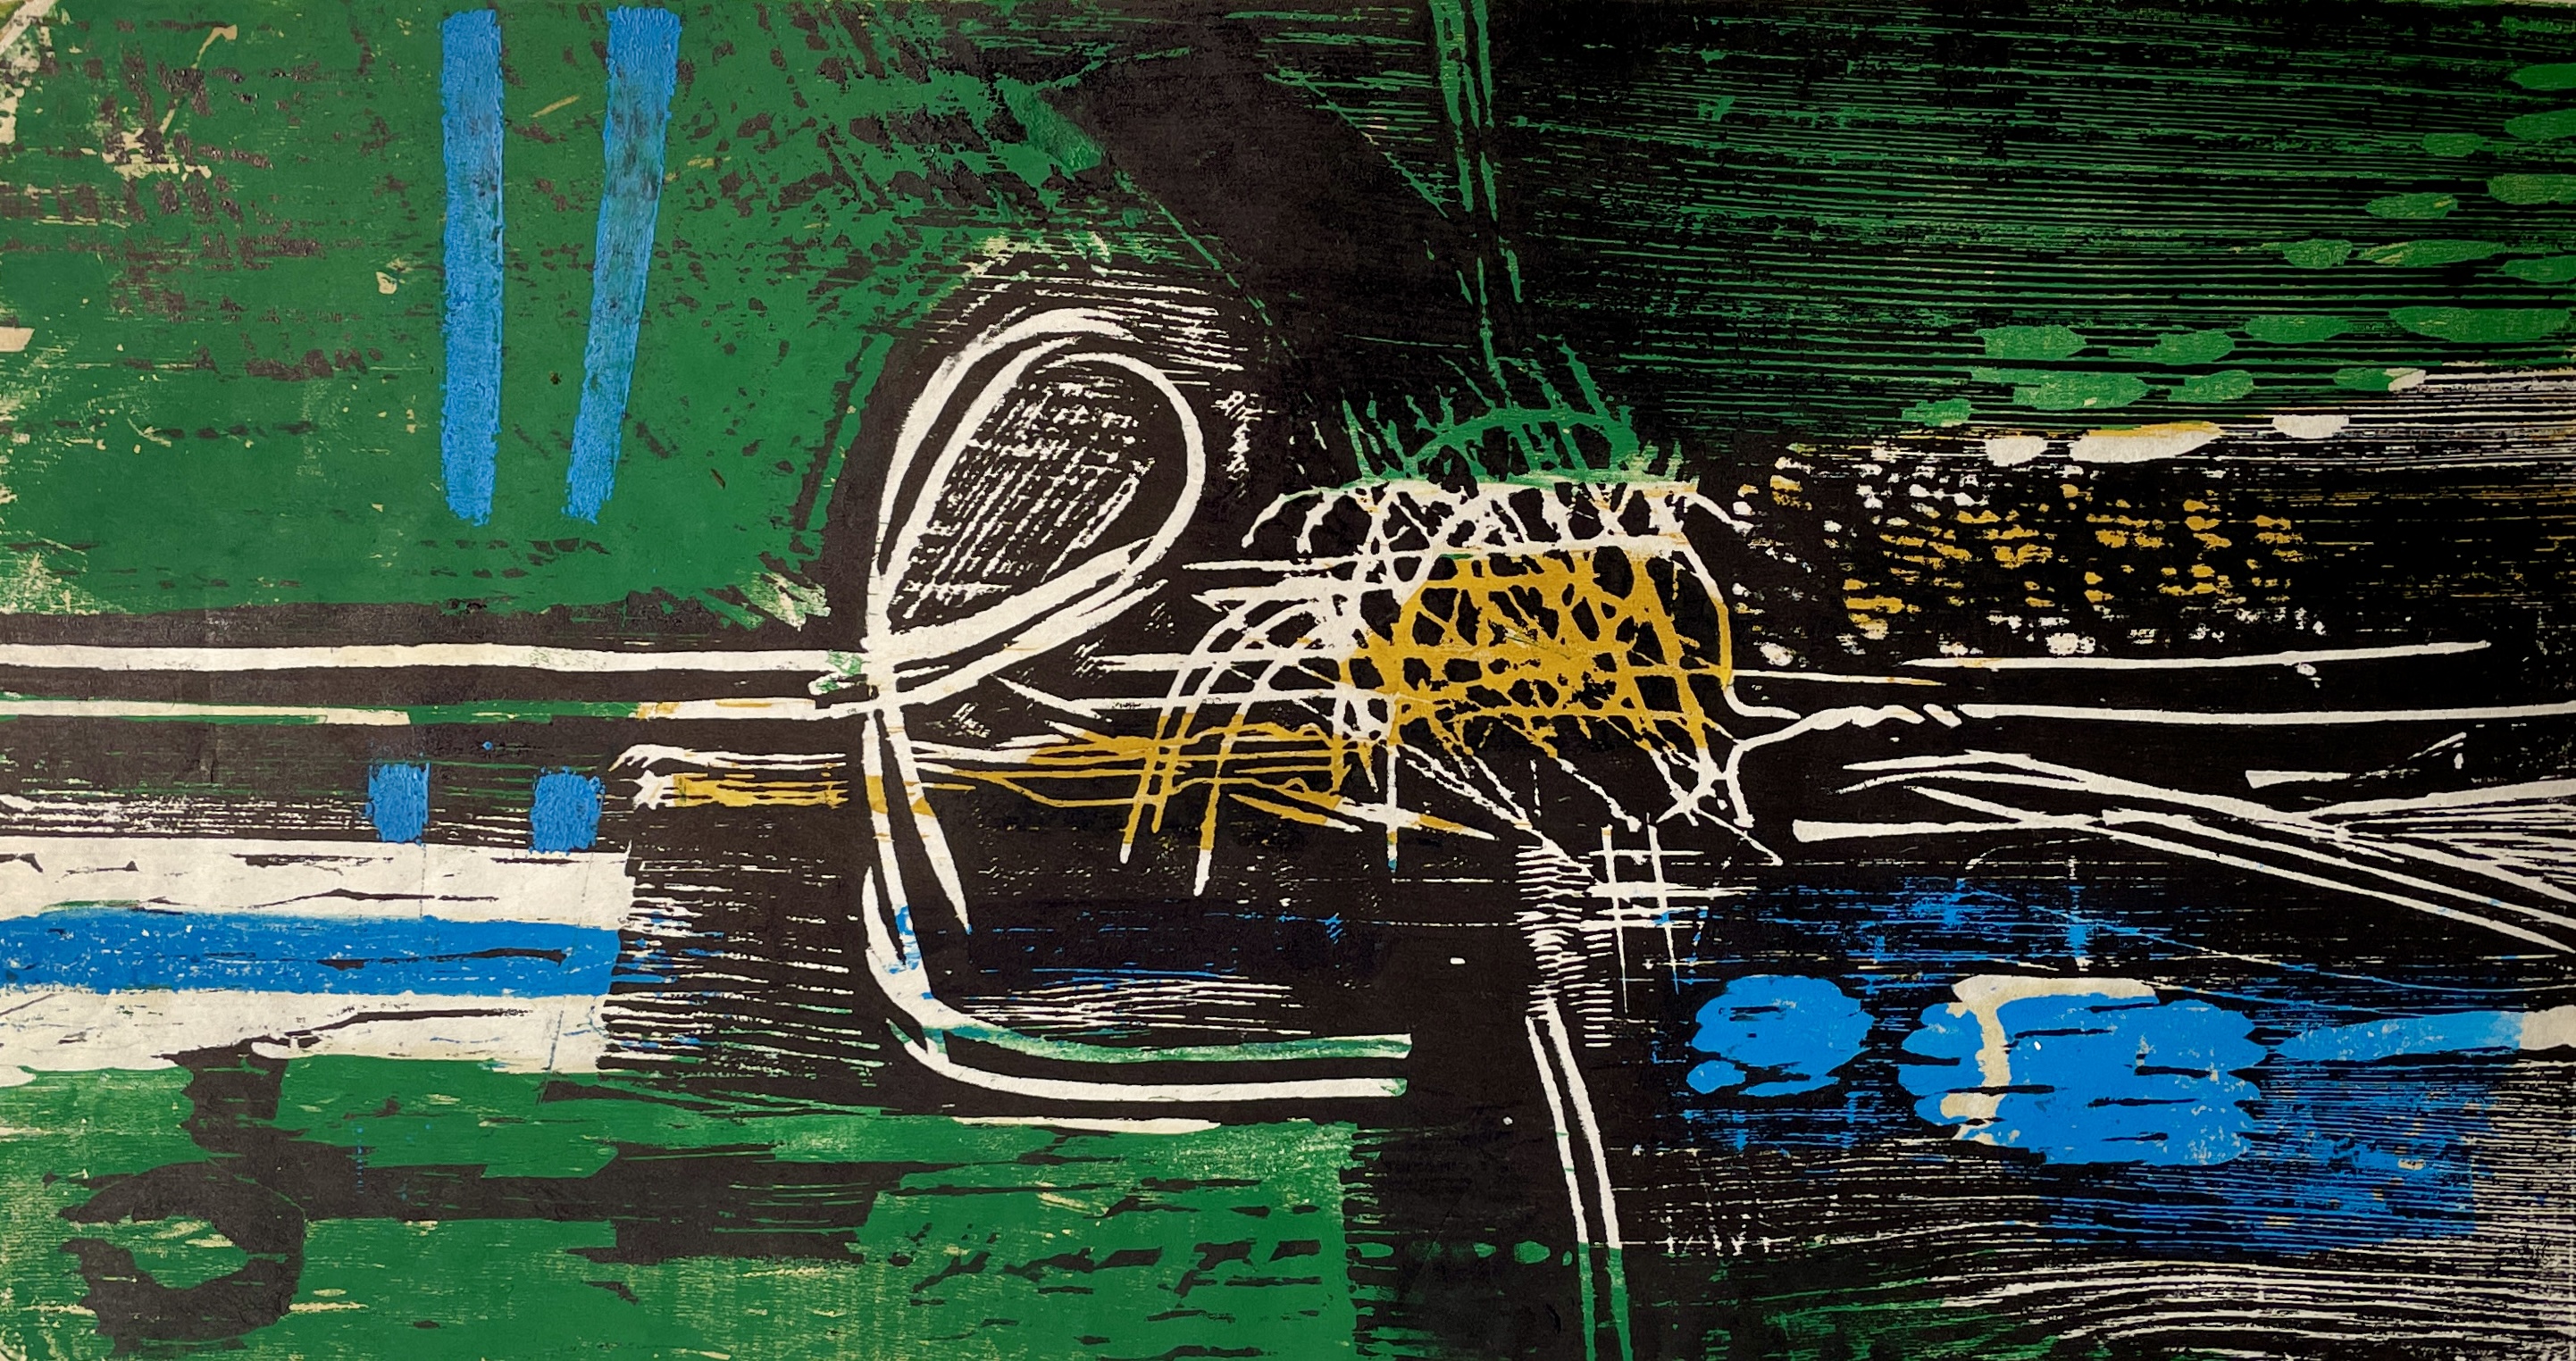 Abstraction Jazz, 1959